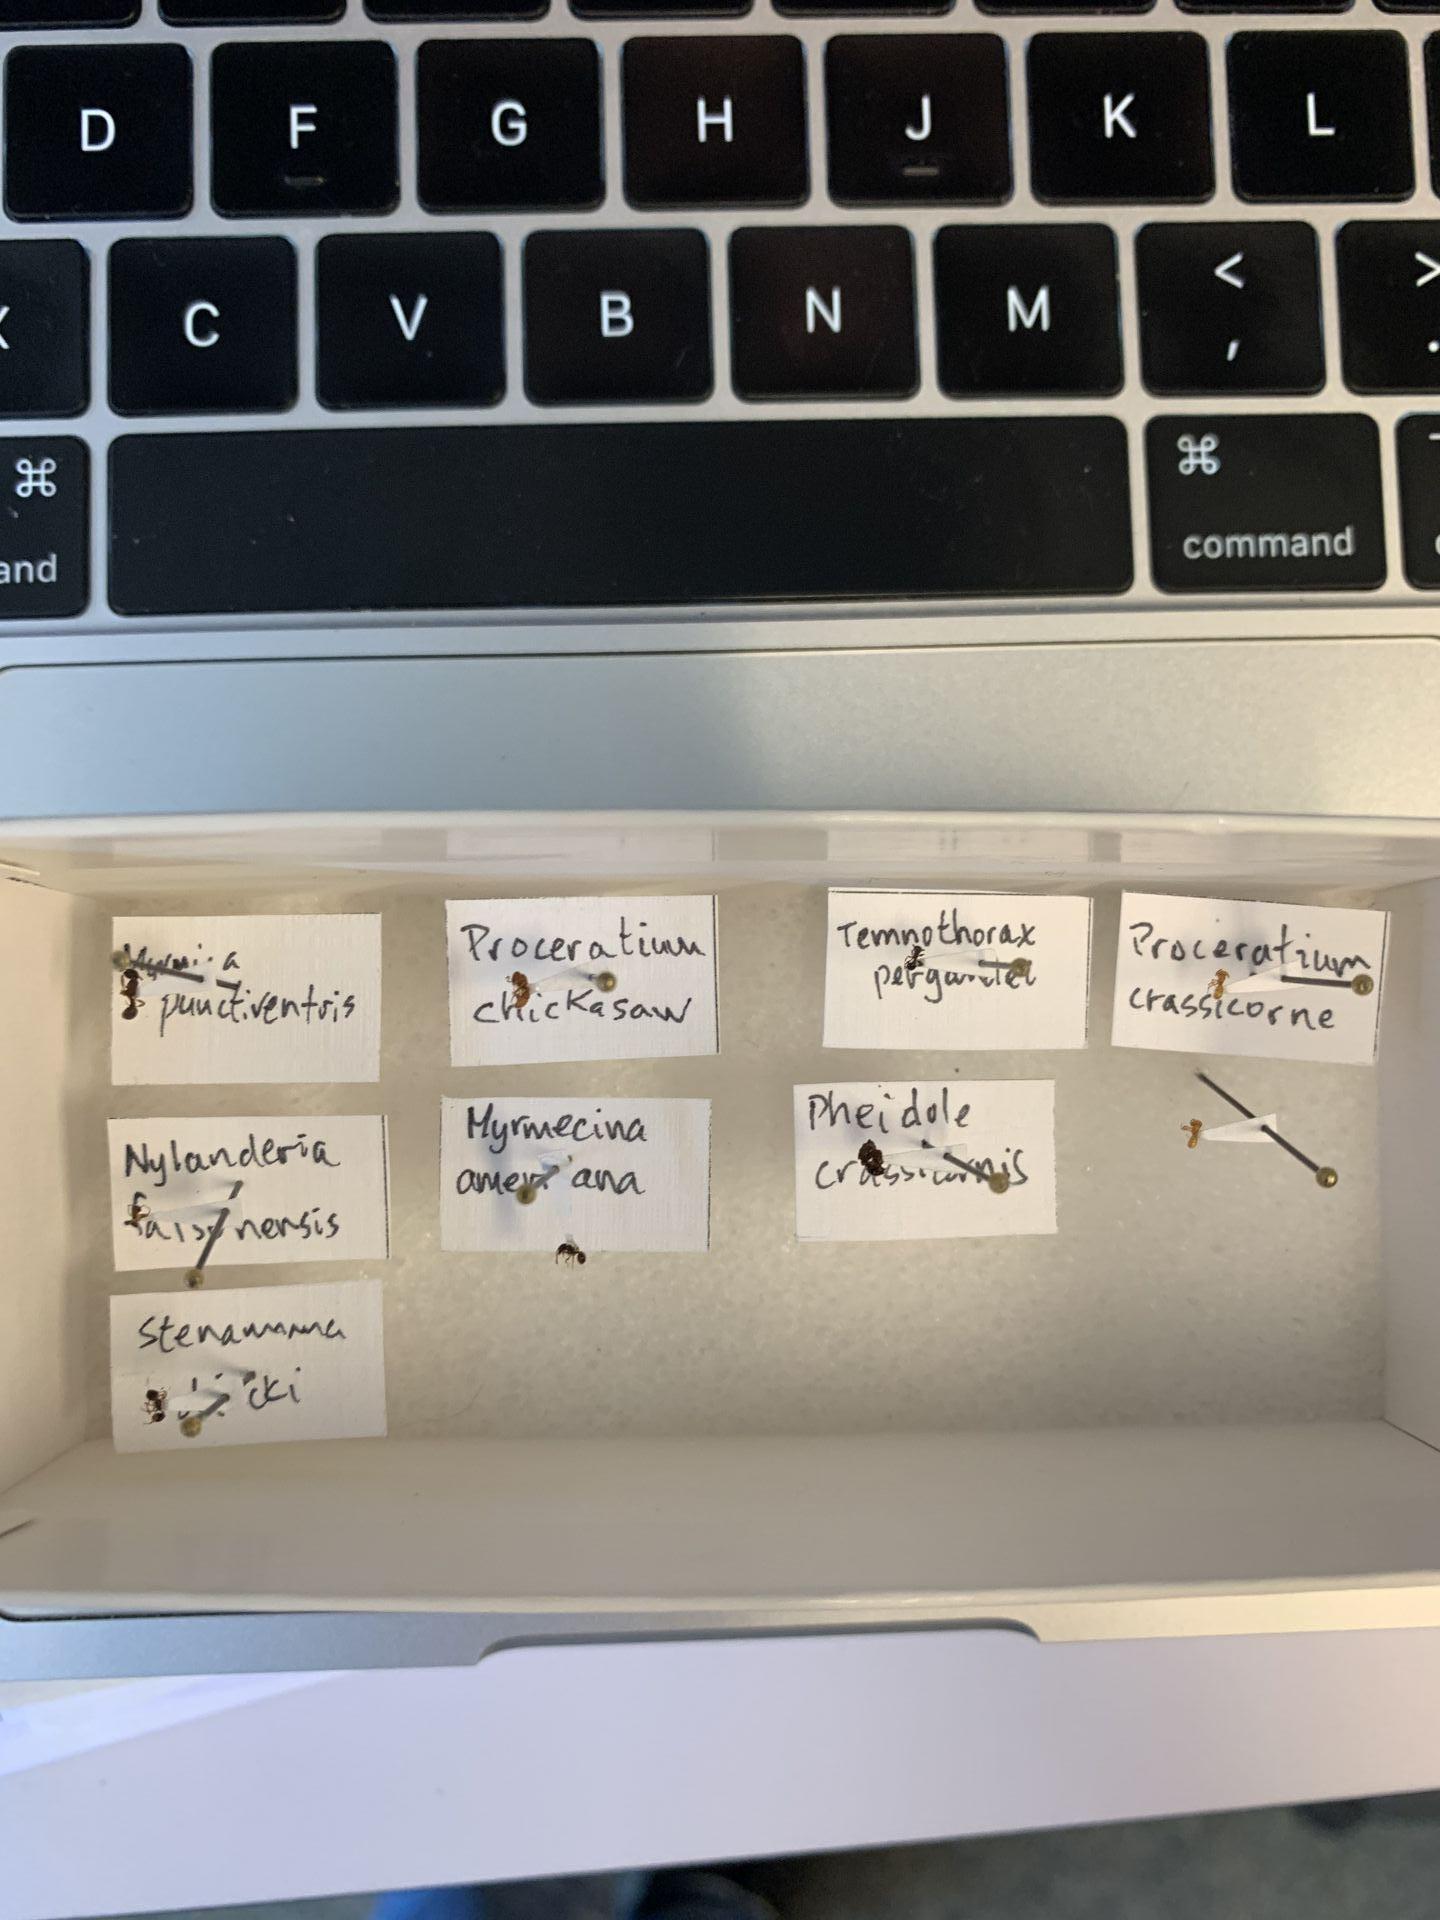 Samples of ants I currently have in my culture that I have ID'ed